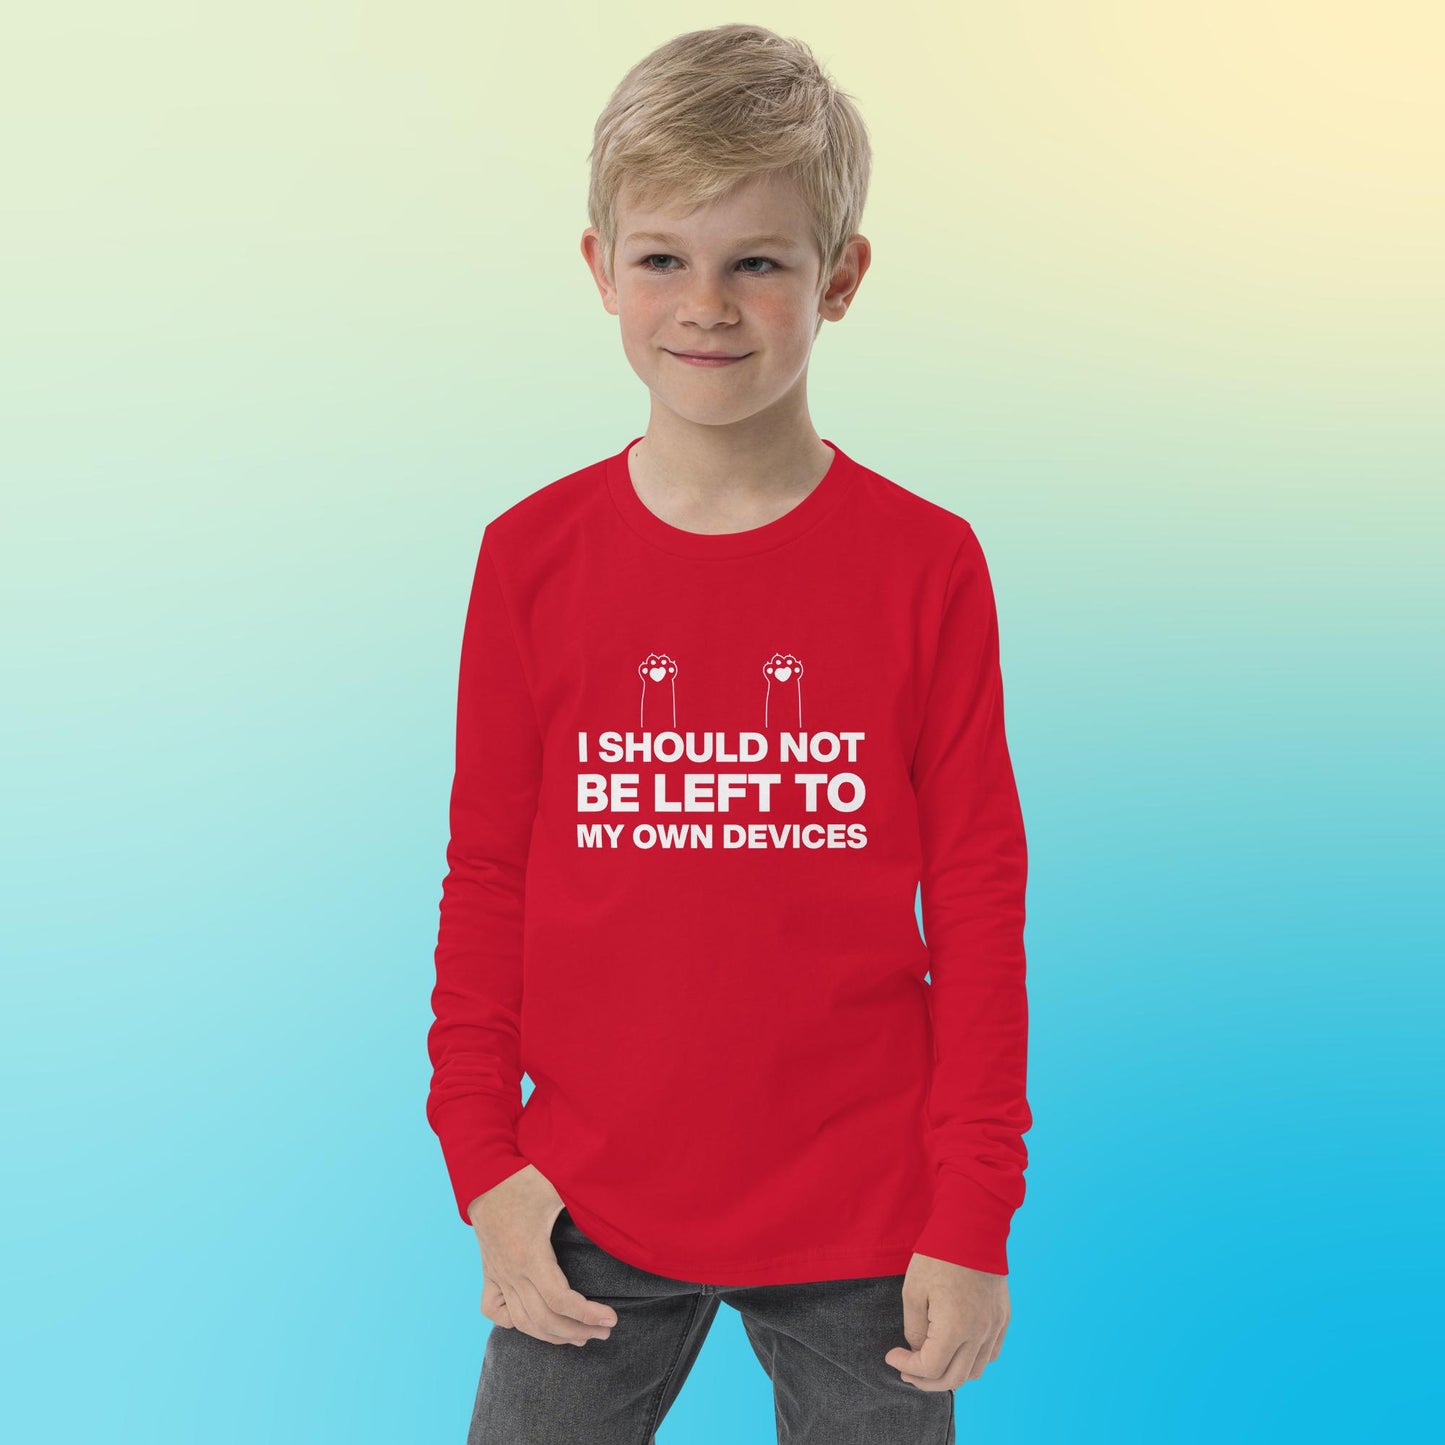 Juniors' Sometimes You Have To Be Your Own Hero Script Tee